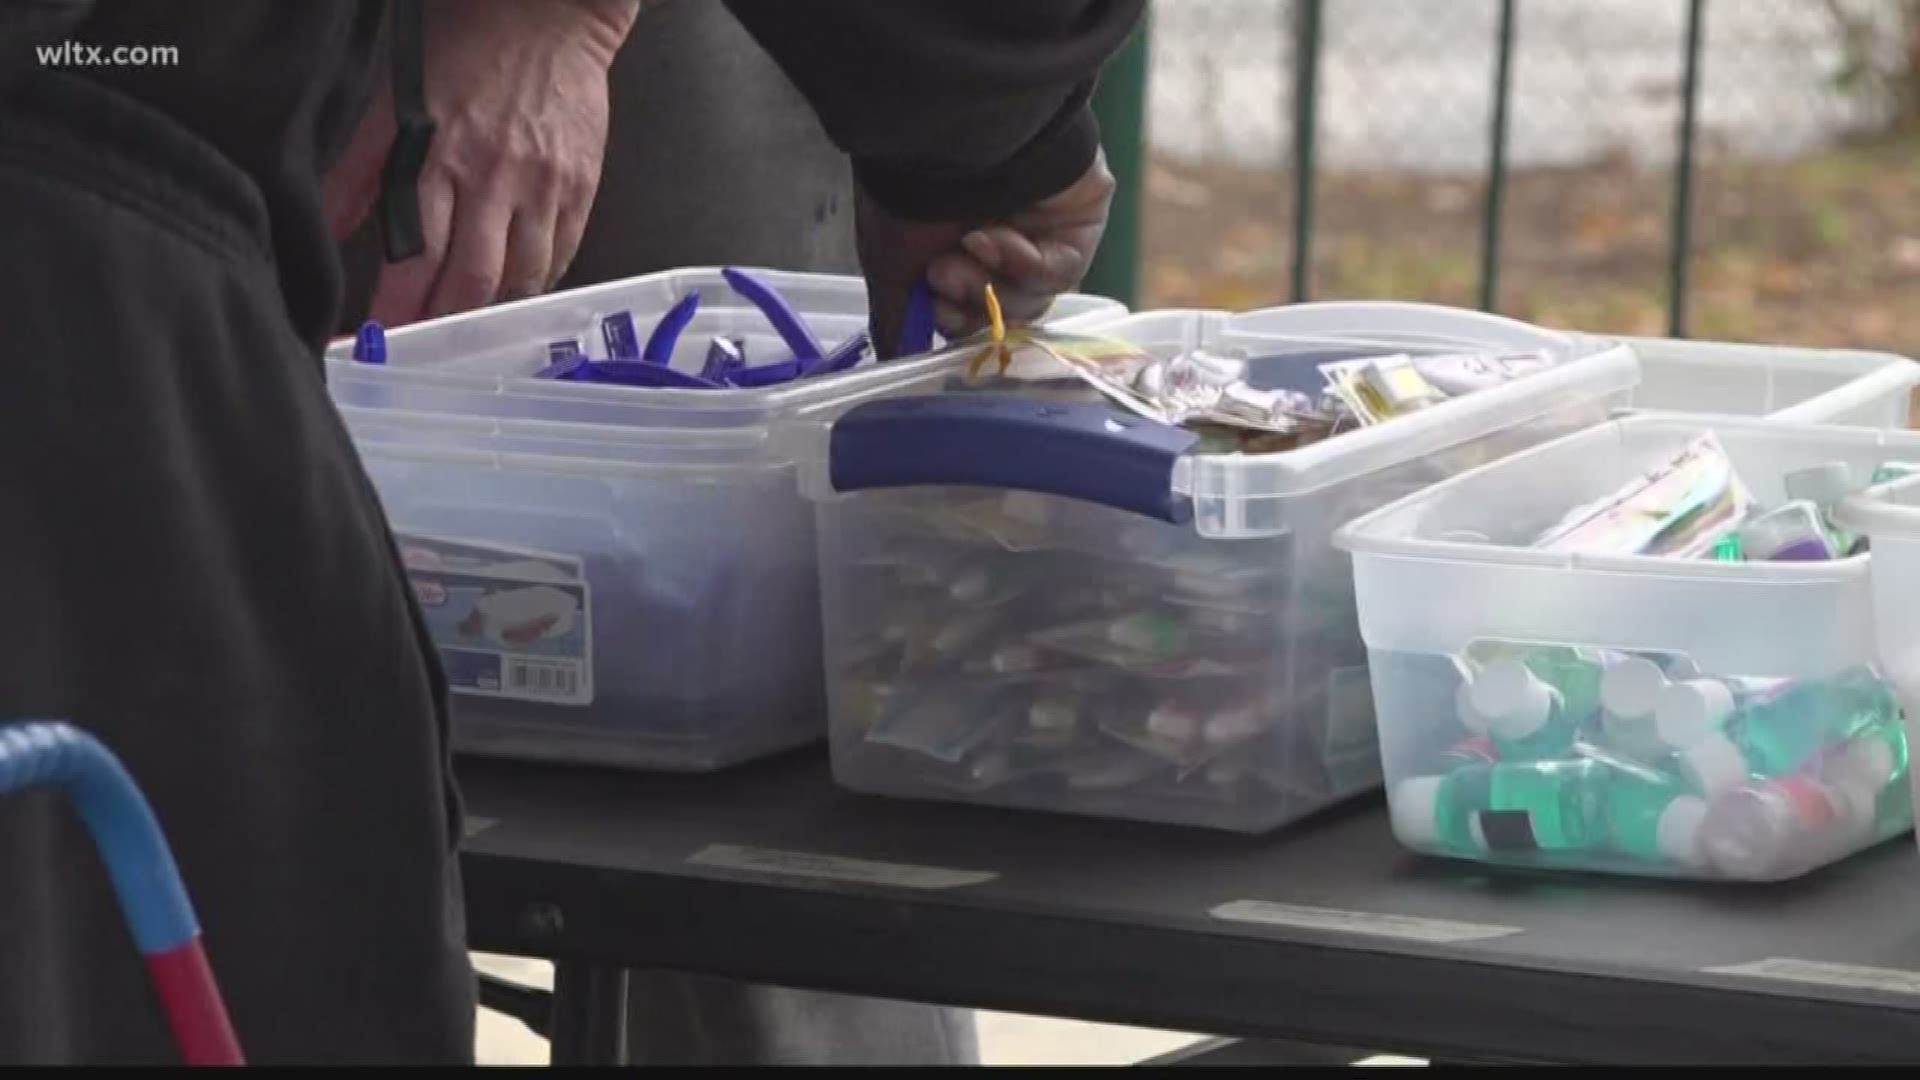 Every third Sunday, homeless men and women line up at Finlay Park to receive things they need.